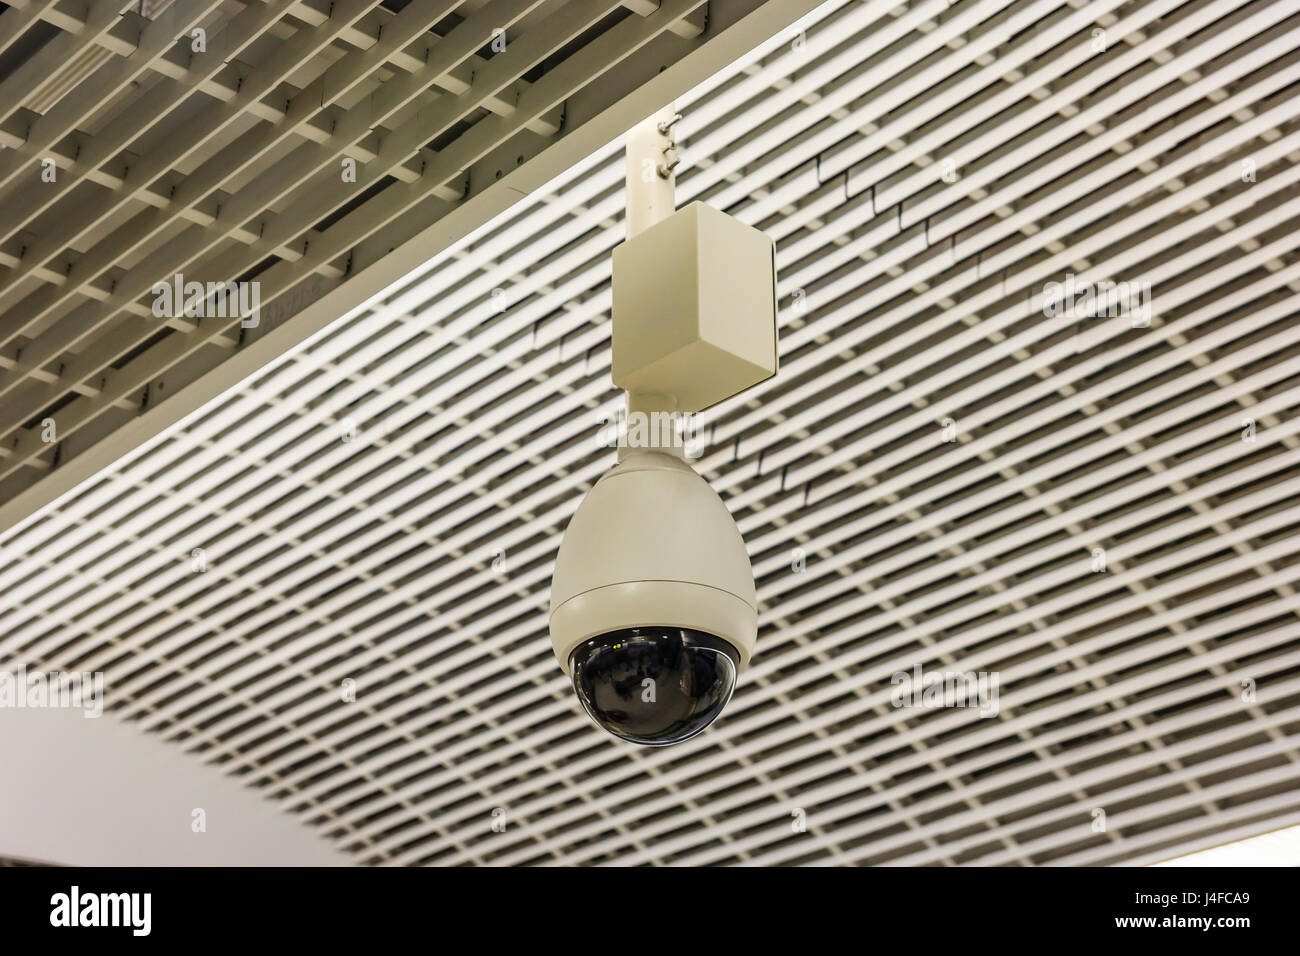 Security Camera, CCTV on location, airport Stock Photo